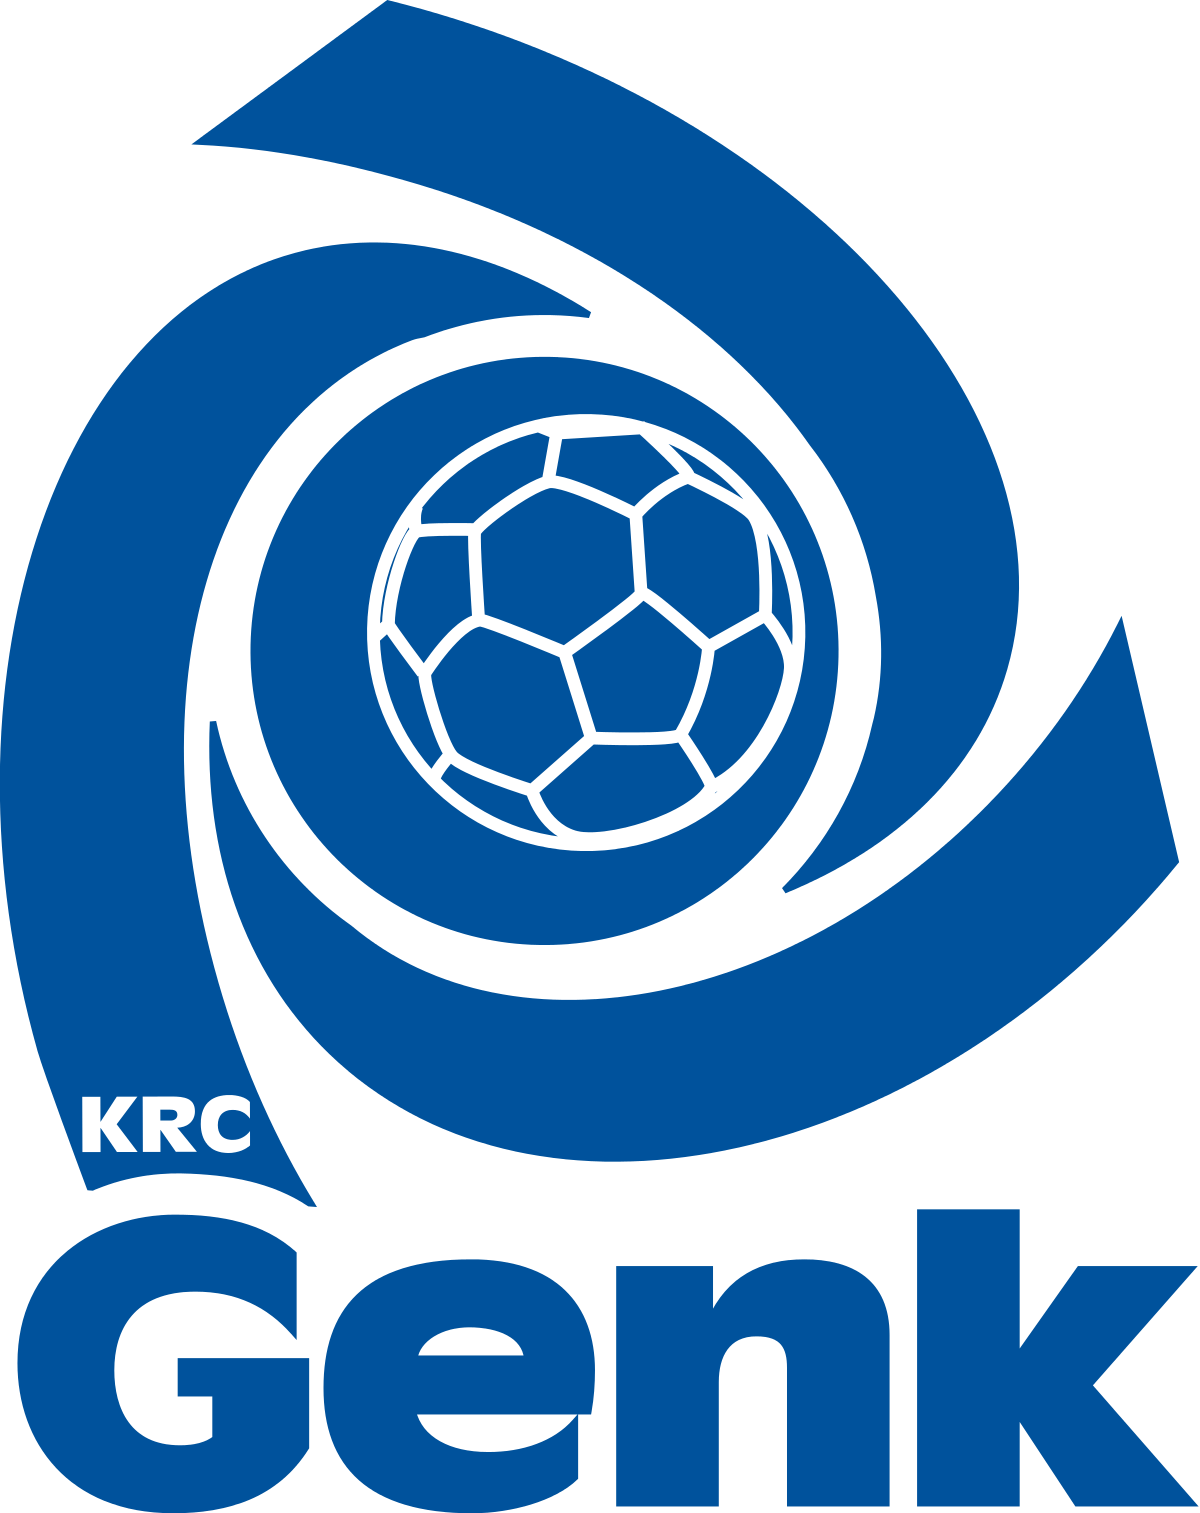 Genk City HD Wallpaper and Photo